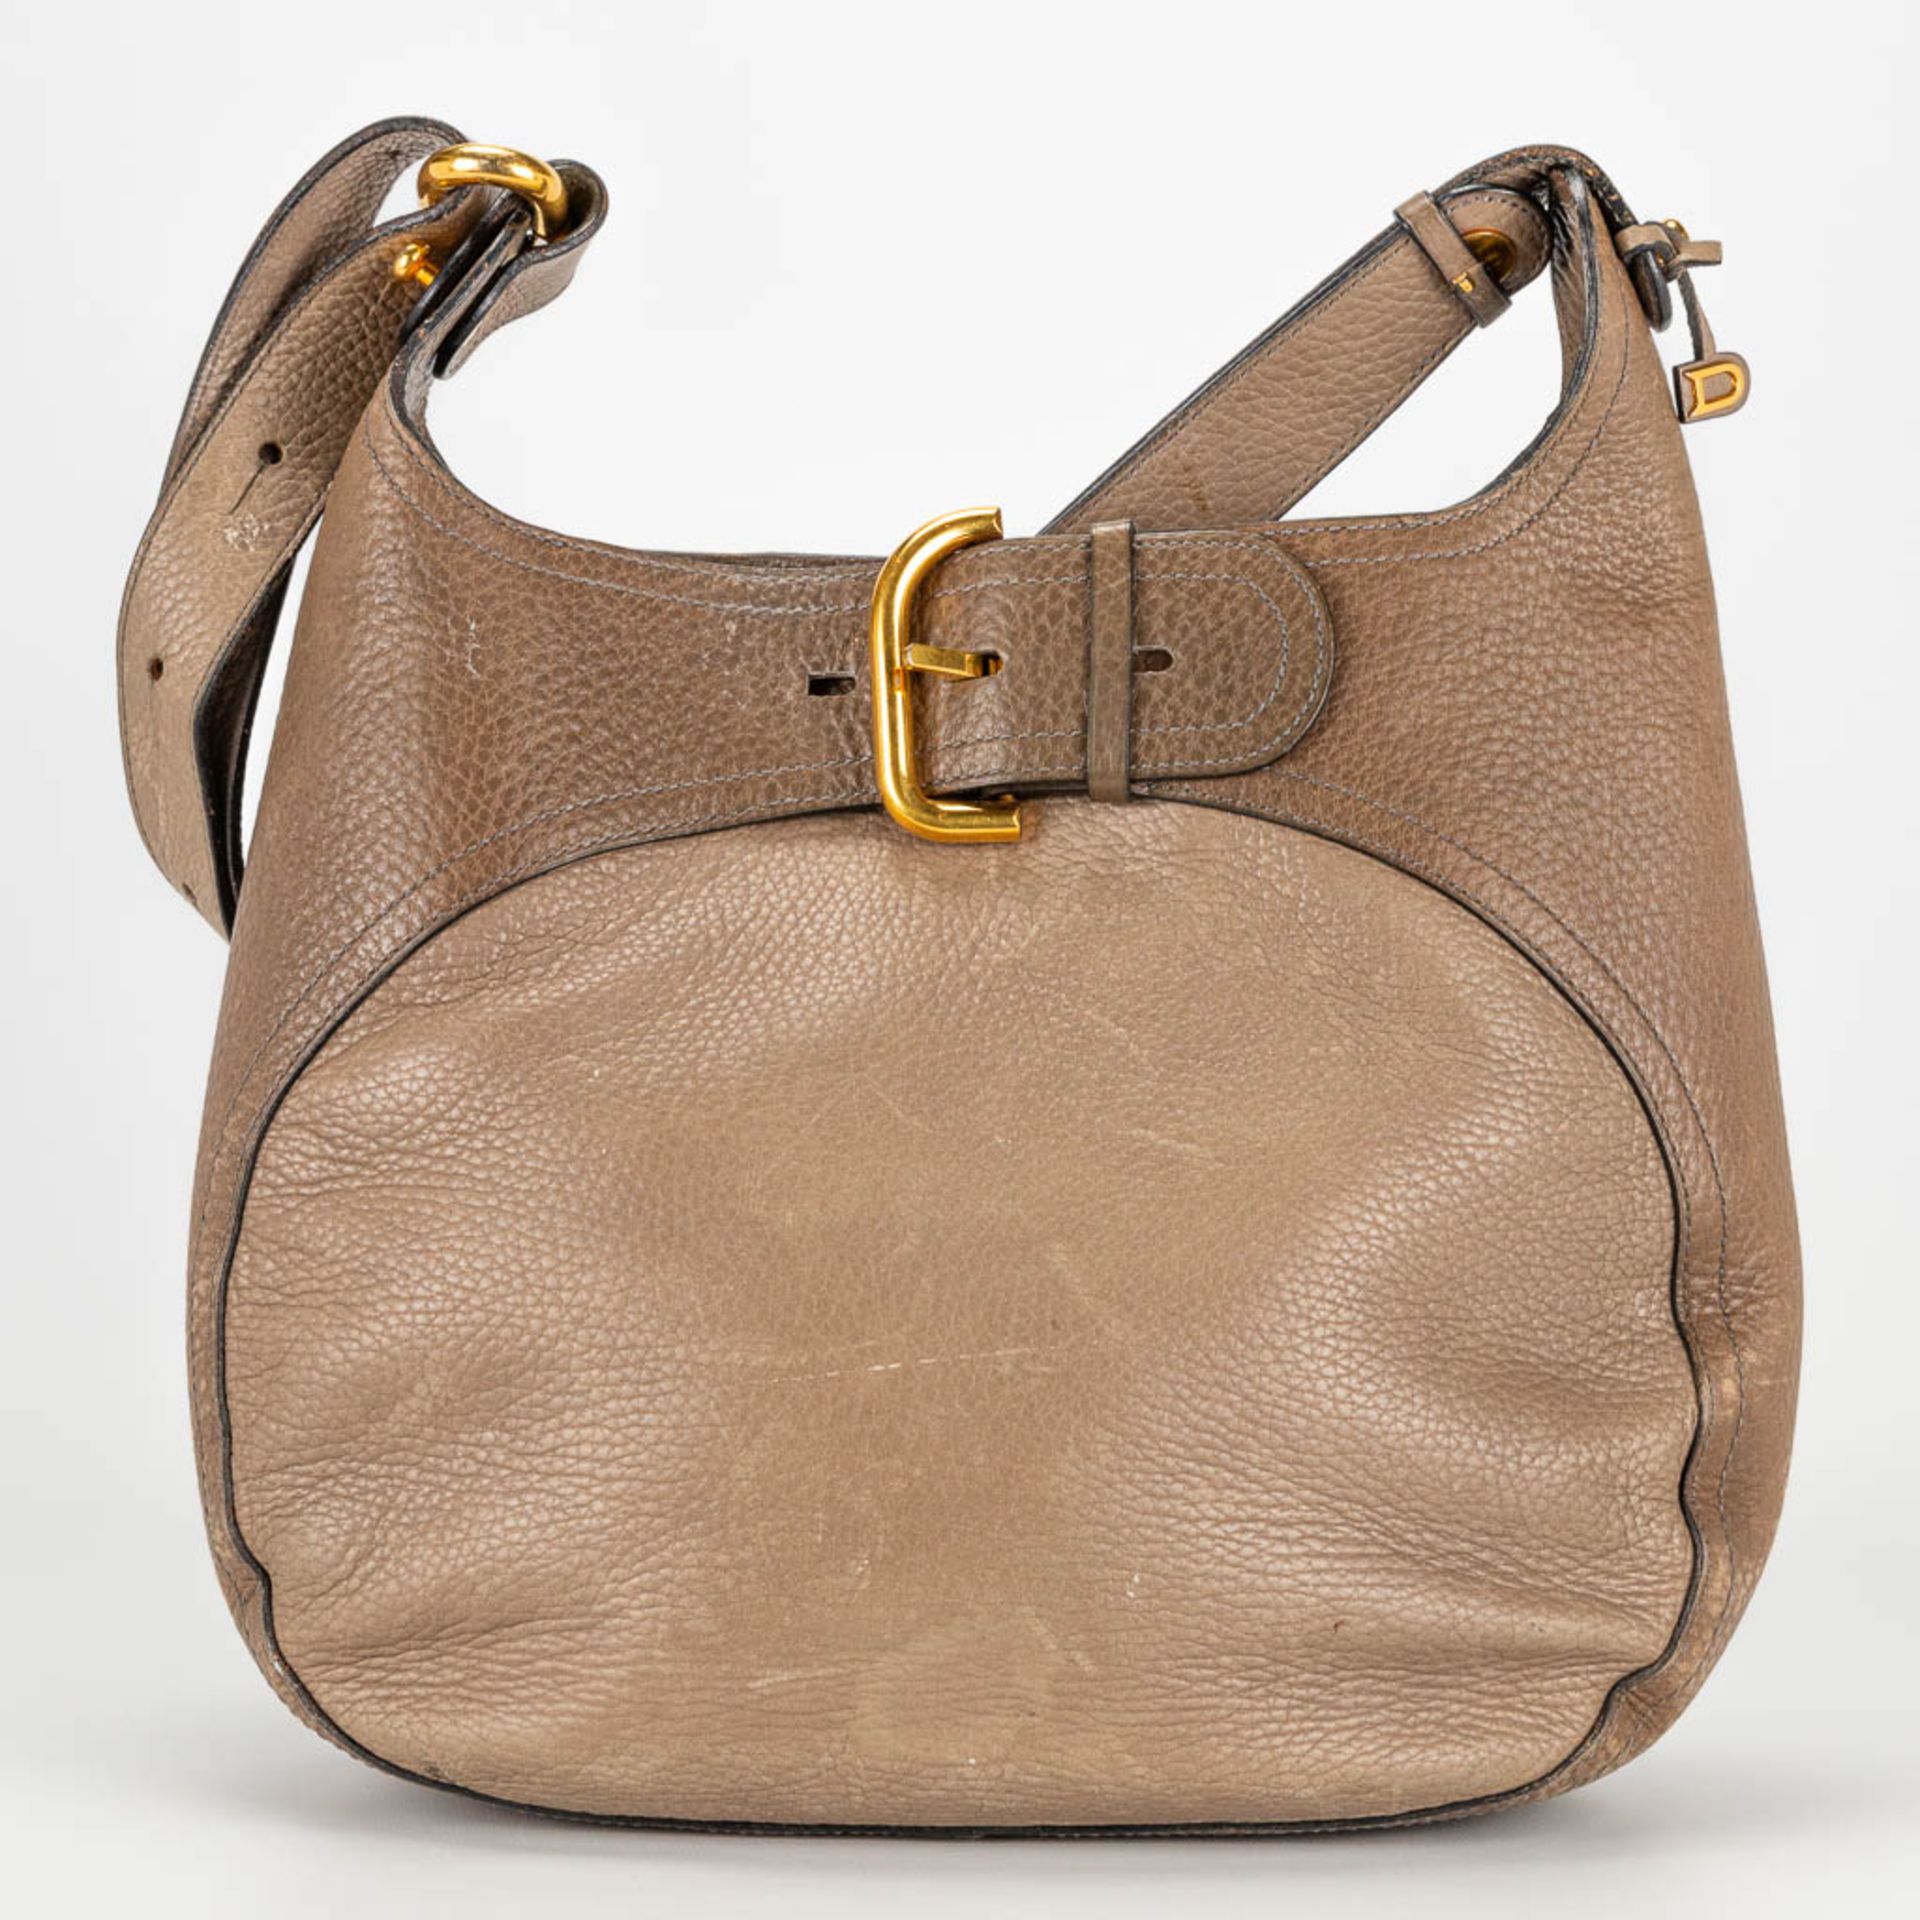 A purse made of brown leather and marked Delvaux. - Image 7 of 16